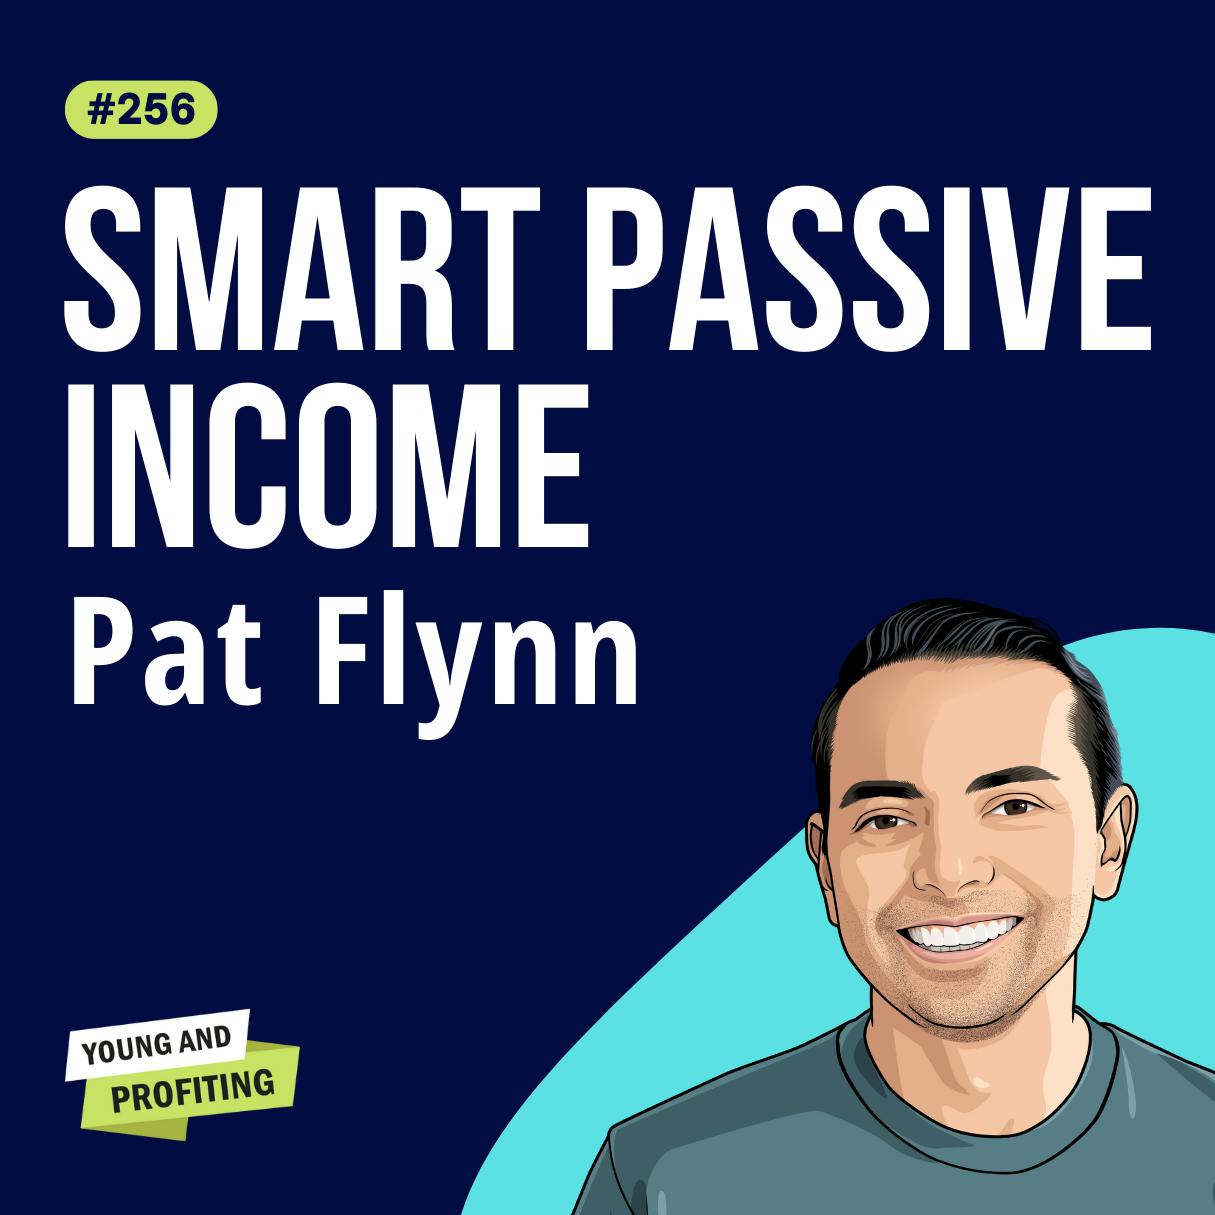 Pat Flynn: Online Business 101, How to Generate 6 Figures of Passive Income and Create a Cult of Superfans | E256